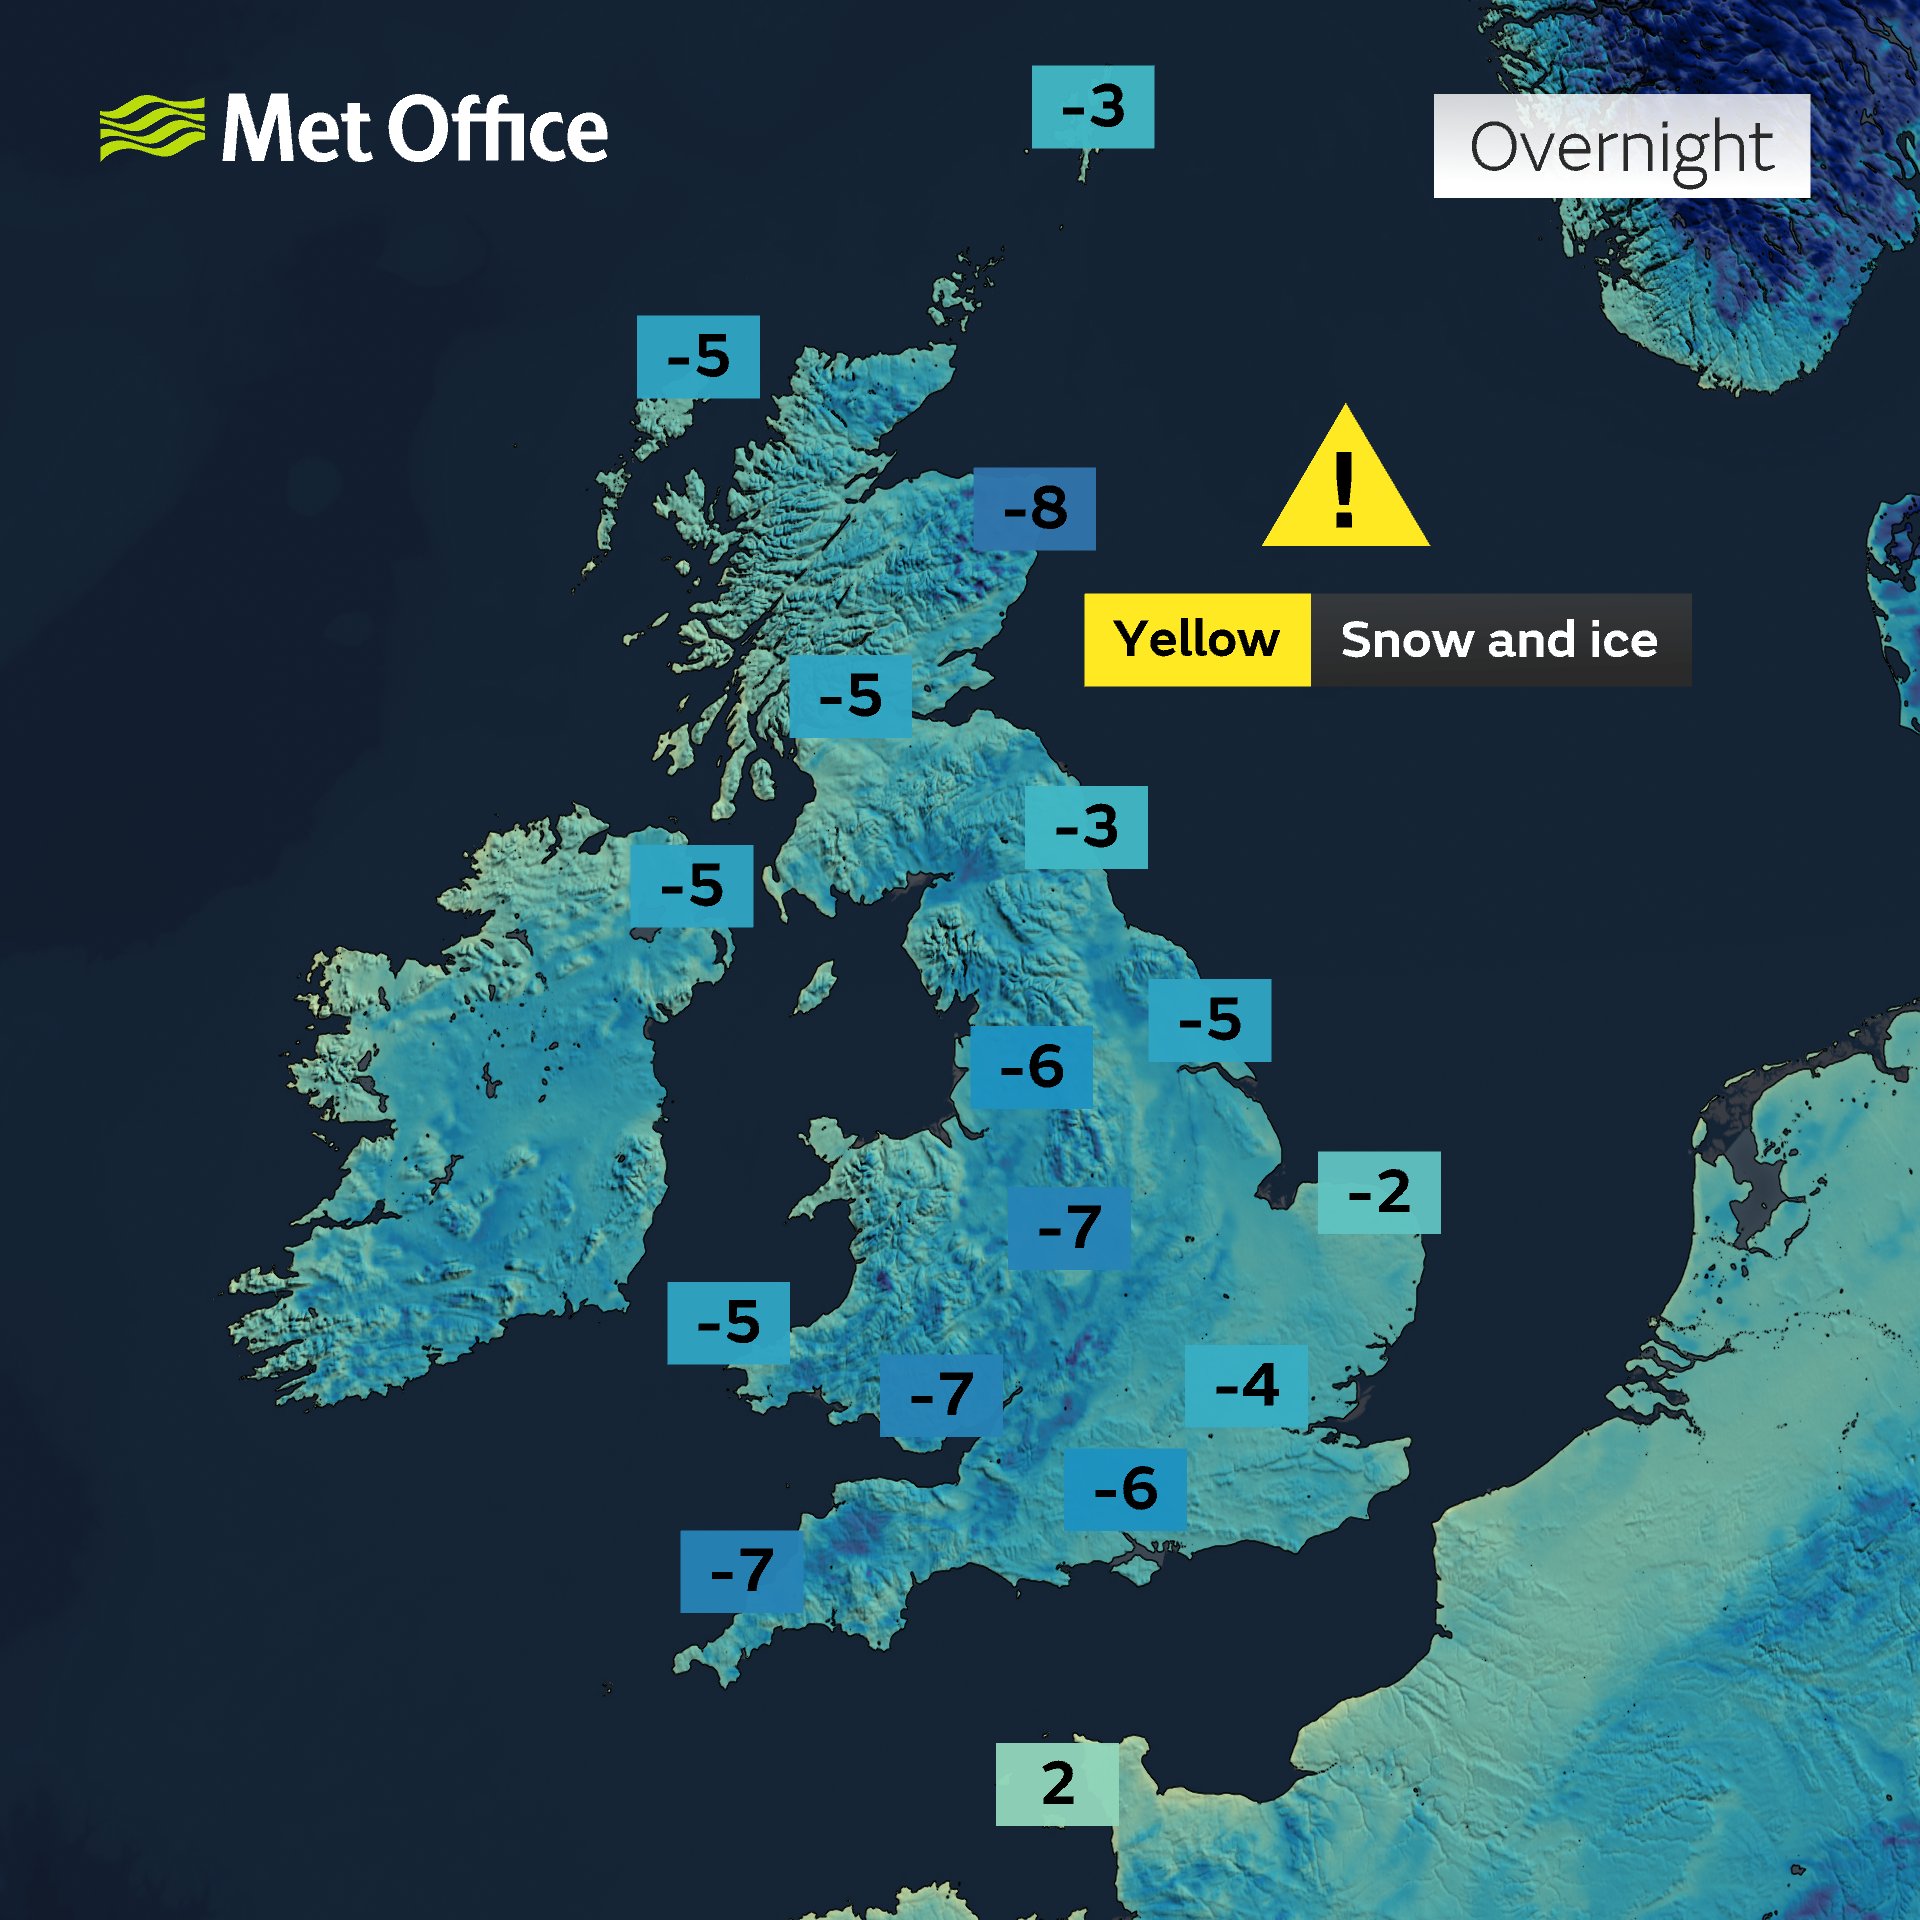 Met Office on X: It's going to be another very cold night across the UK  with a widespread hard frost Watch out for some icy stretches on any  untreated surfaces, especially where